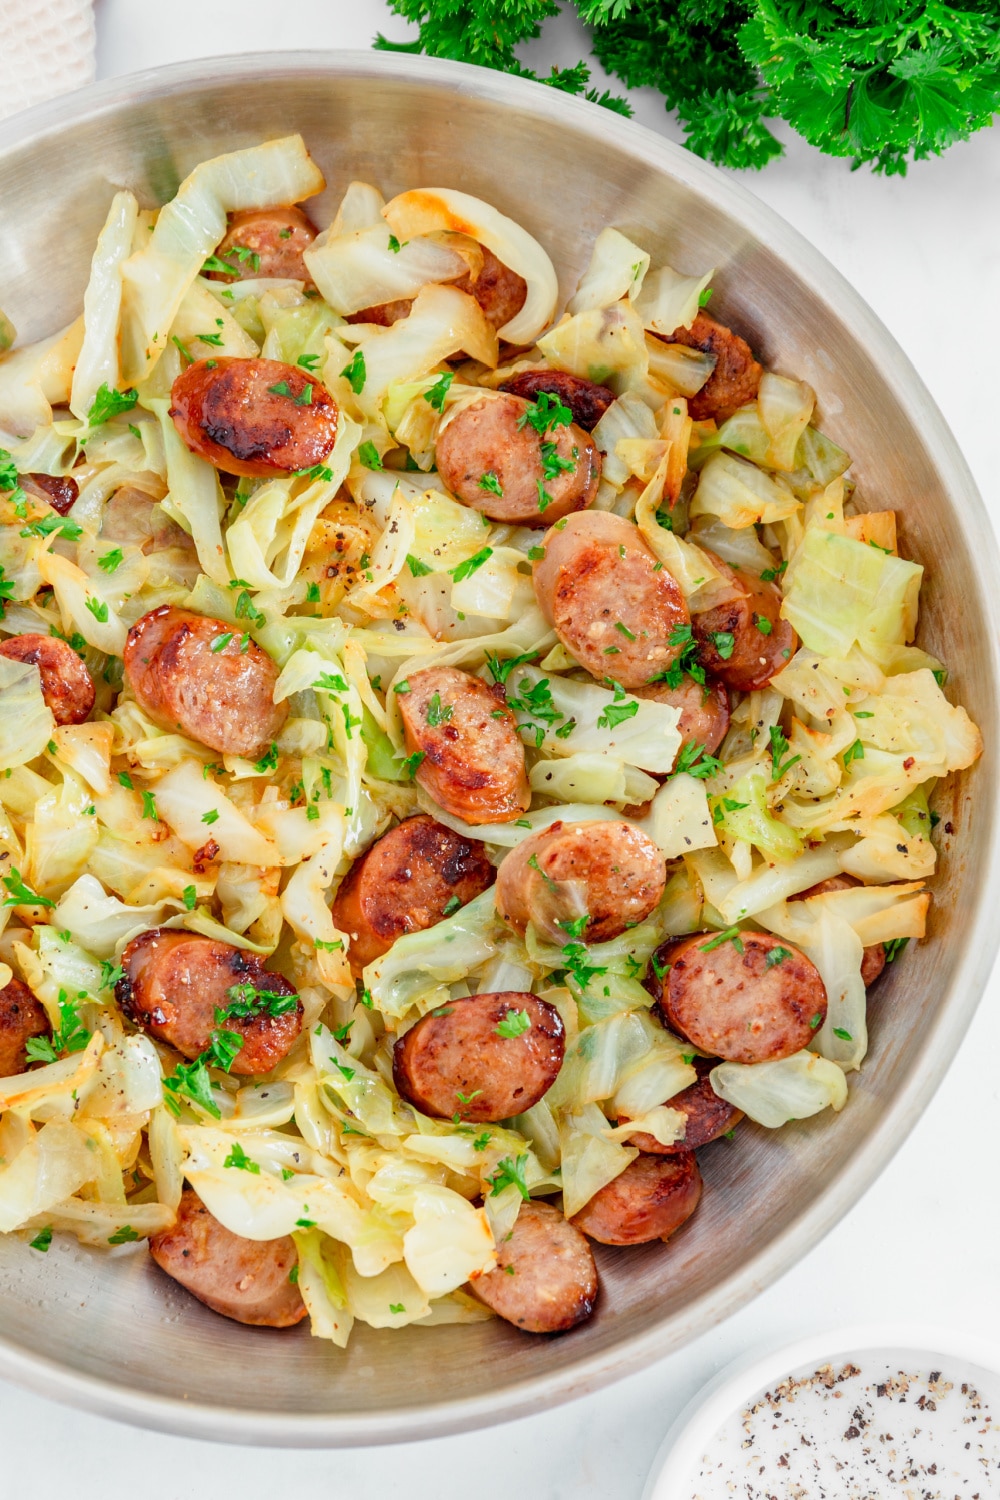 Fried cabbage and kielbasa sausage in a white bol.